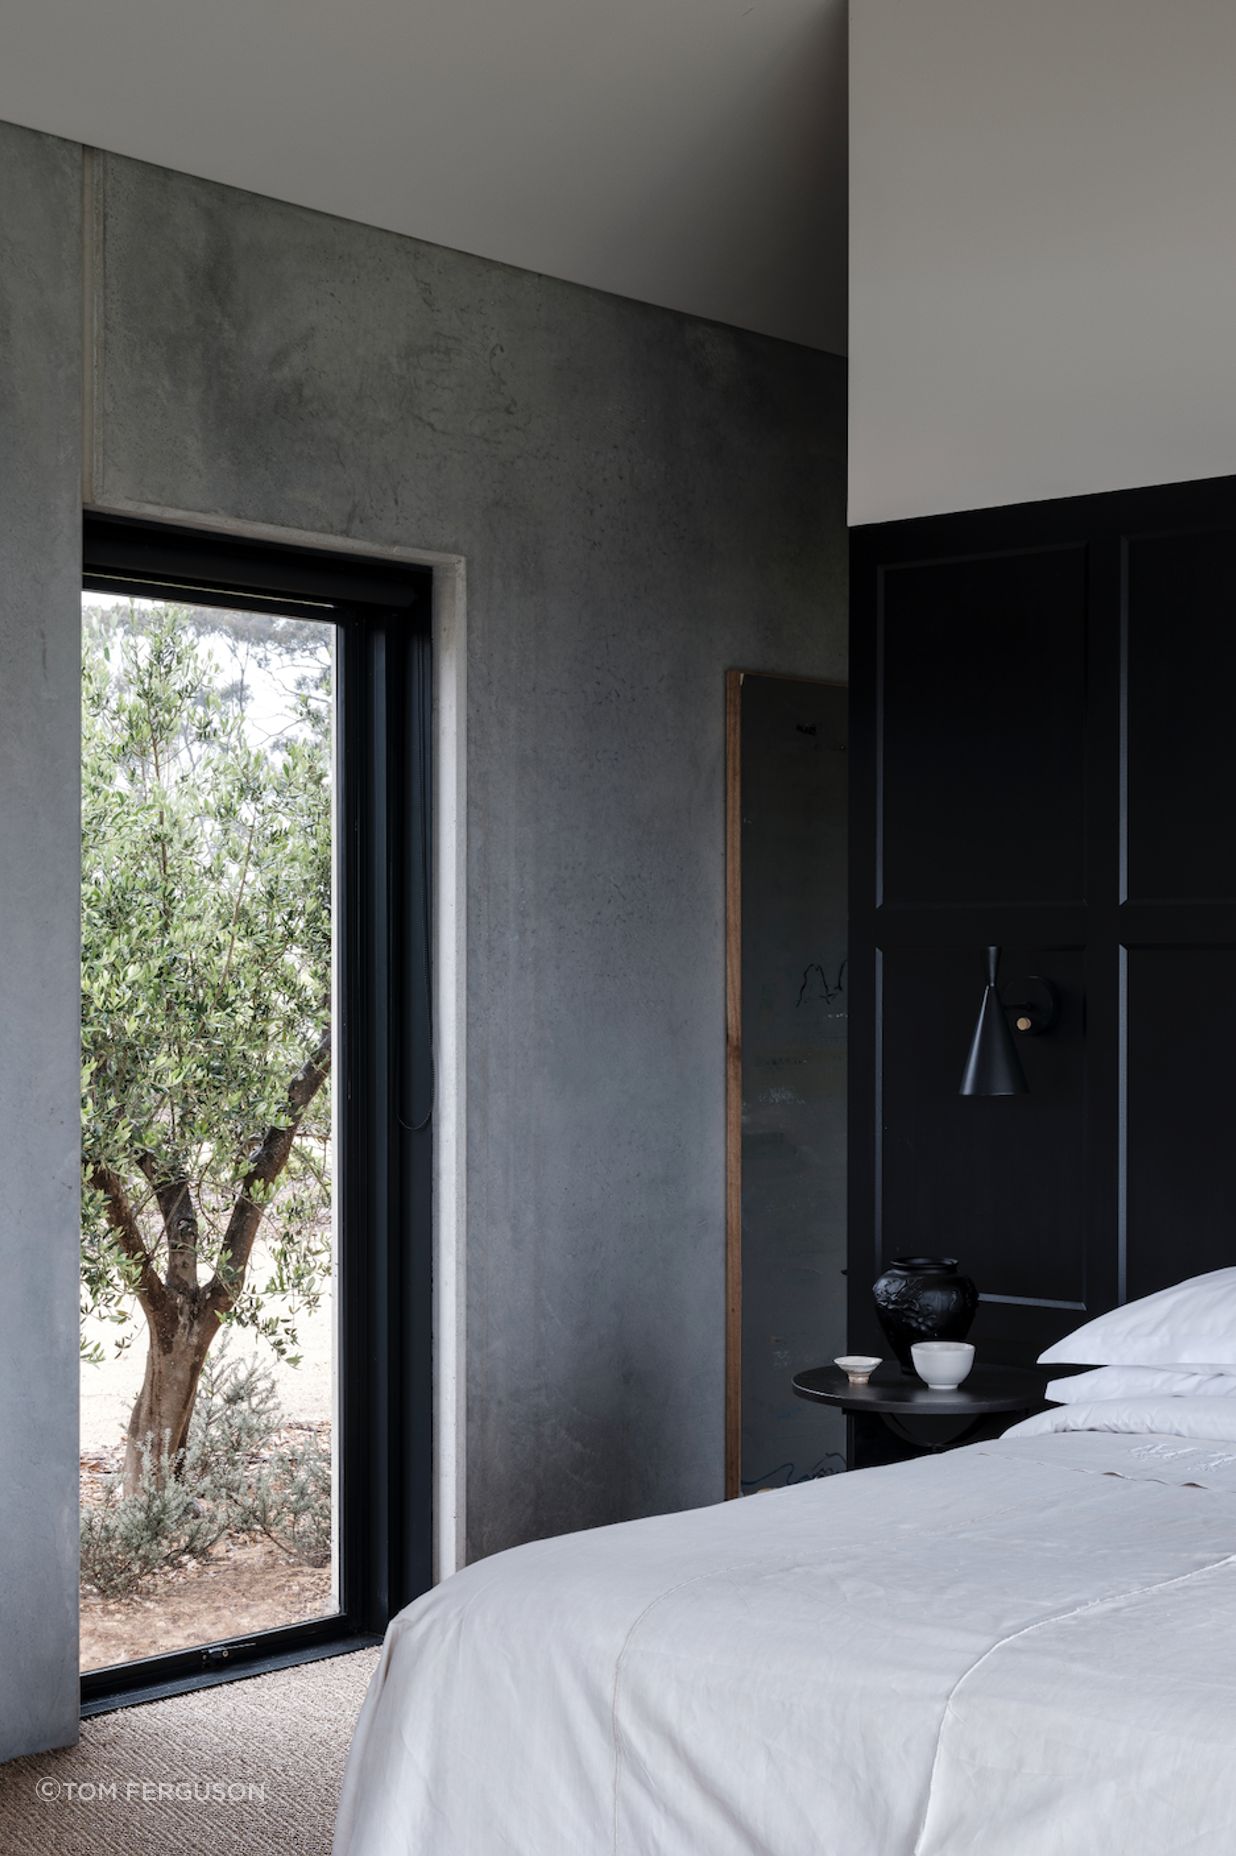 “The monastic simplicity of concrete panels has lent the interiors a rawness that tends towards the serene," describes Moloney.